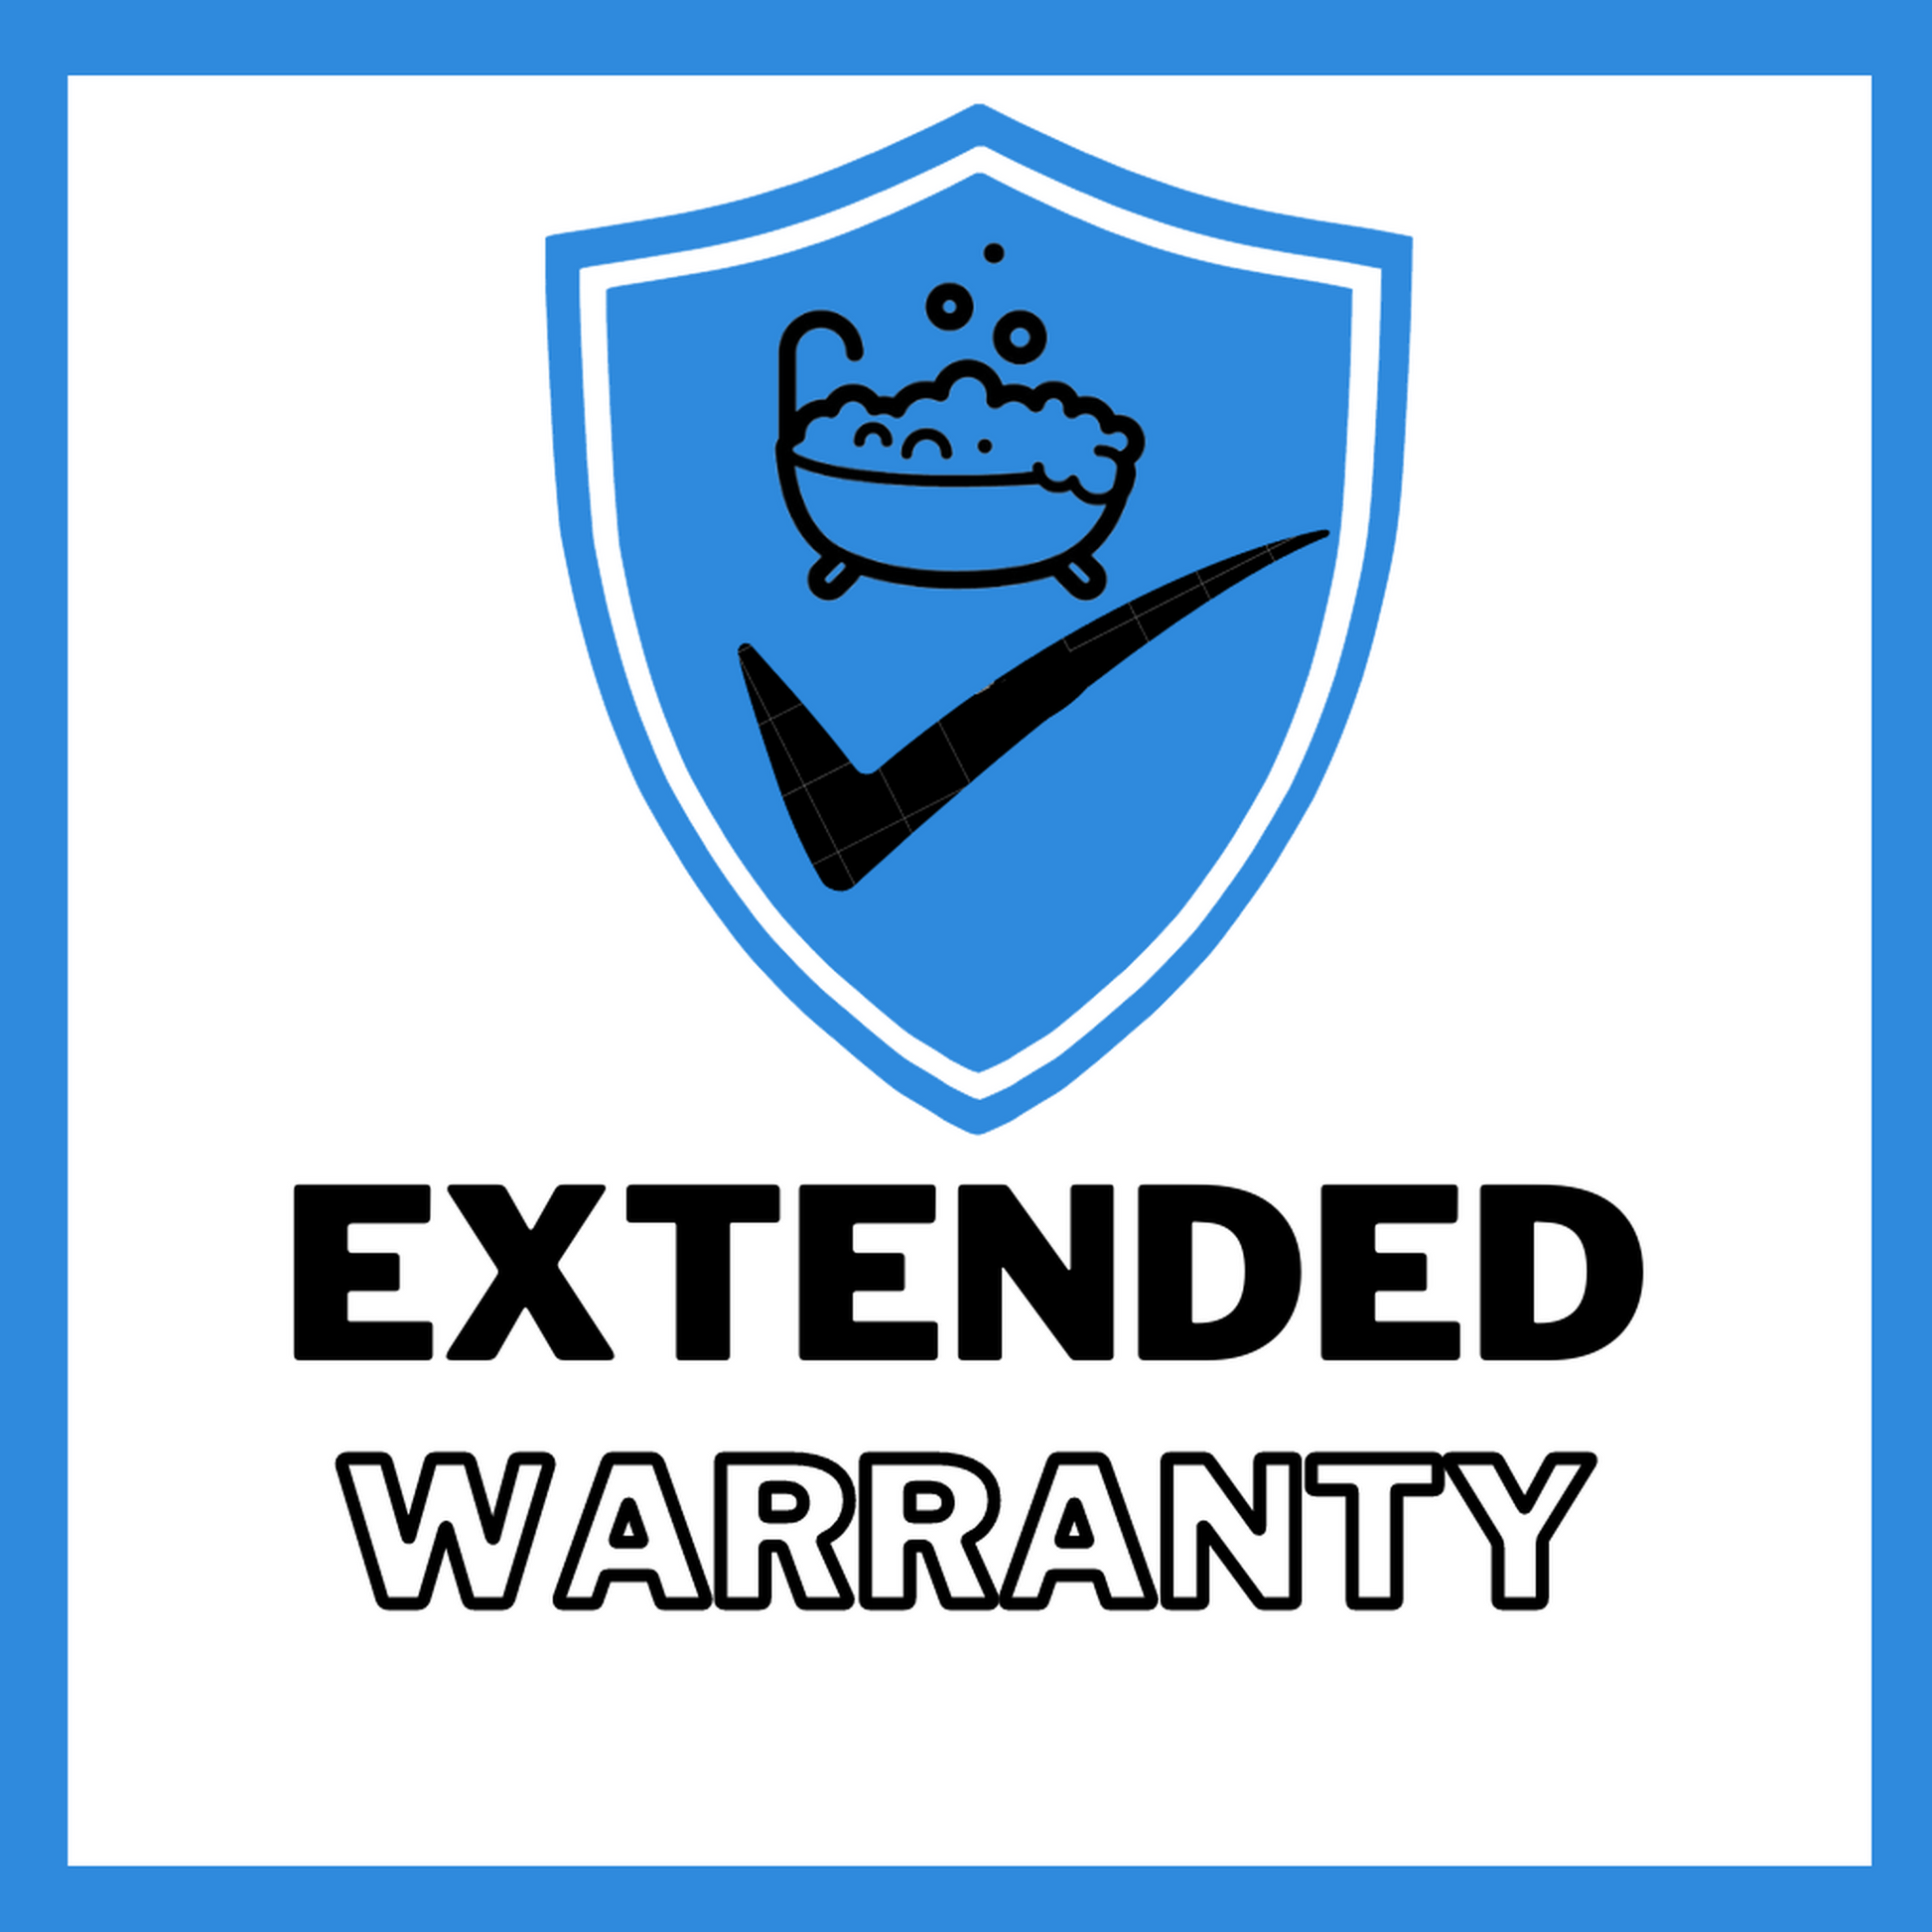 Extended Warranty [applies to products under $2999]